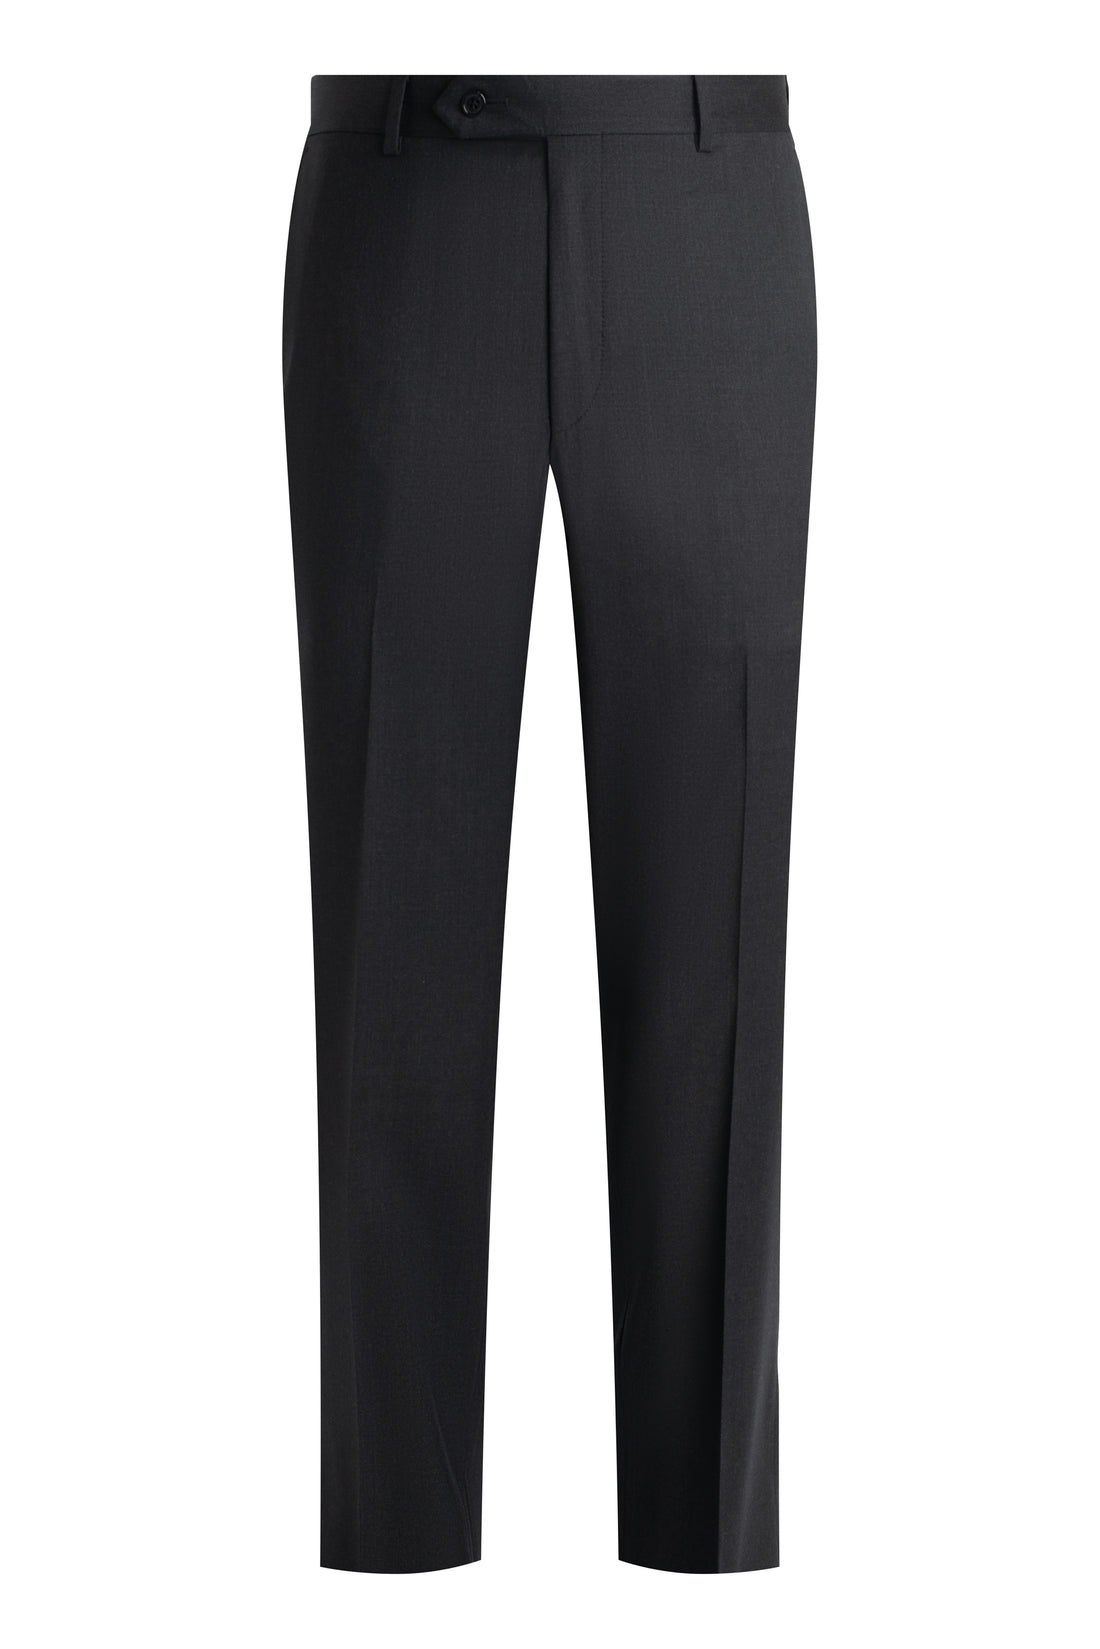 Charcoal 110's Serge Pant front